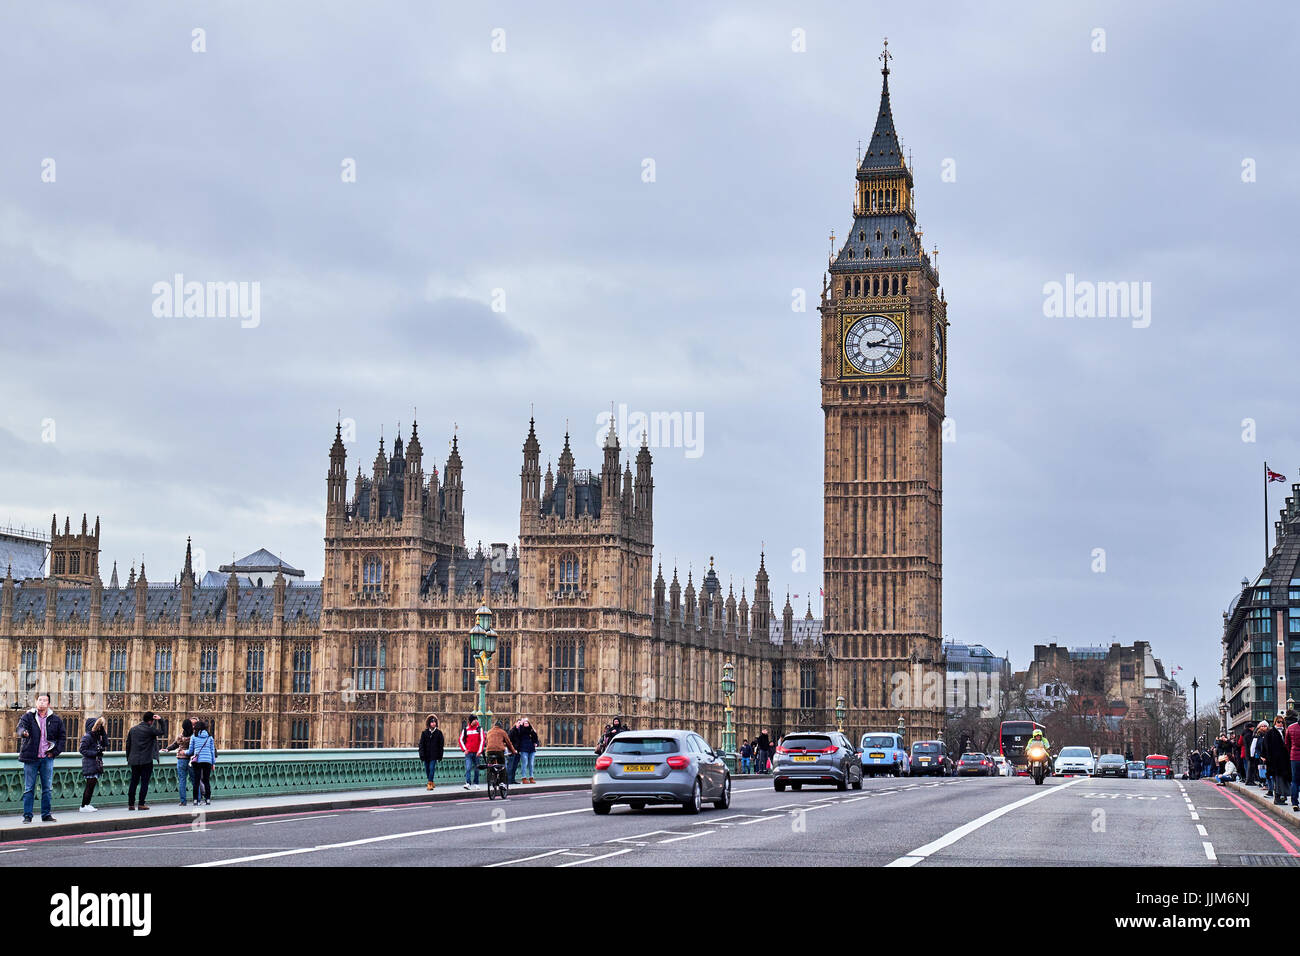 LONDON CITY - DECEMBER 24, 2016: People a and cars  on Westminster Bridge with Big Ben and the Parliament in the background Stock Photo